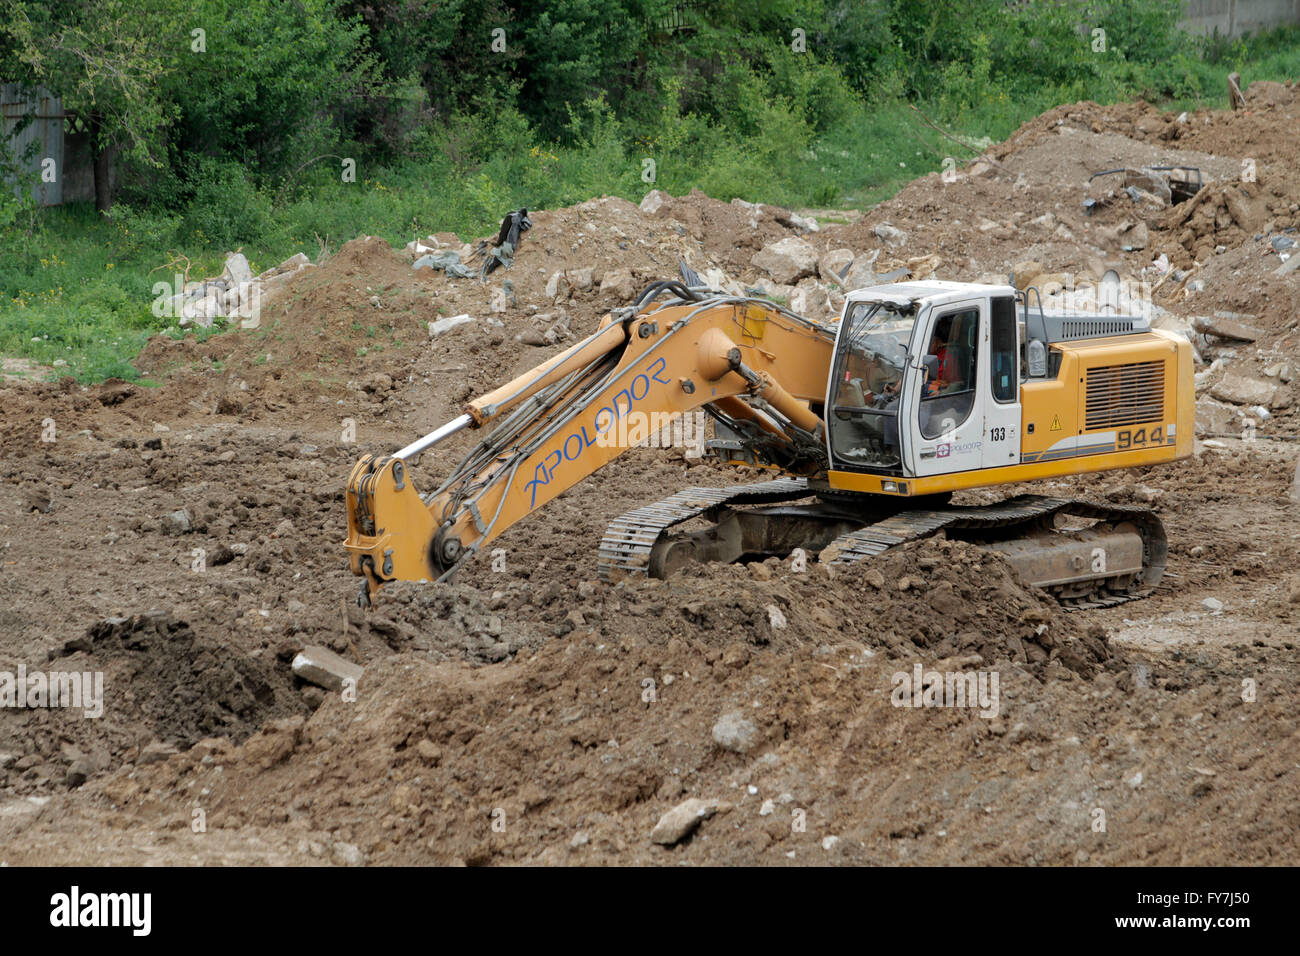 Bucharest, Romania, April 19, 2016: An excavator working removing earth on a construction site. Stock Photo